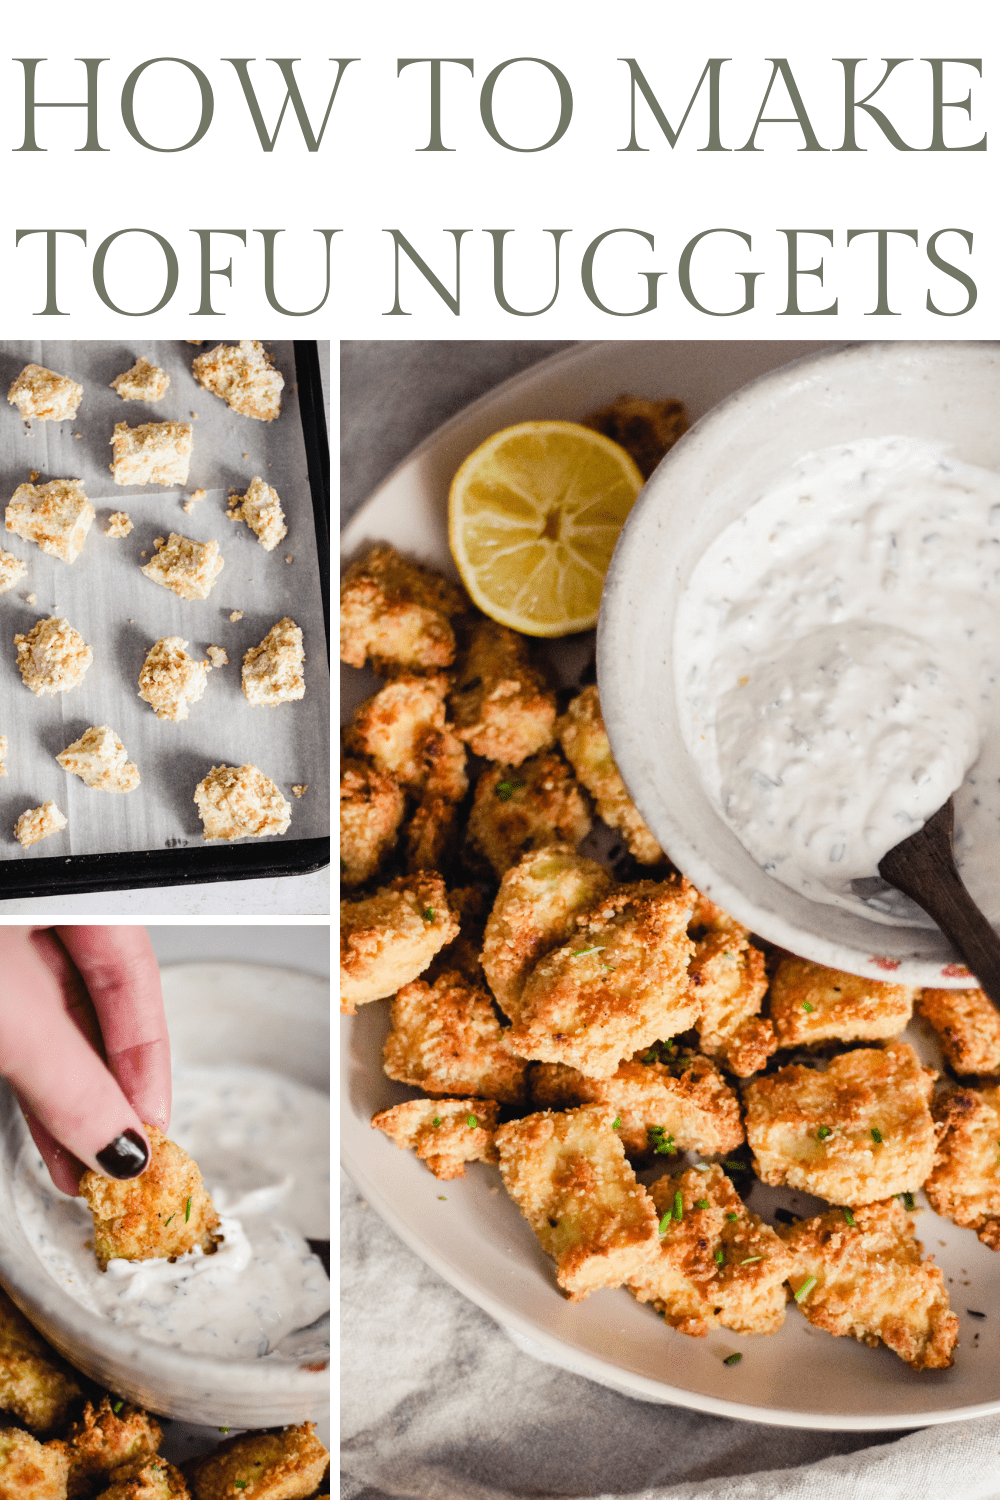 Image collage with upper left image of breaded tofu on a baking sheet before baking, lower left image of a hand dipping a tofu nugget into yogurt ranch dip, righthand image of finished tofu nuggets on a plate with yogurt ranch dip. Text reads "How to Make Tofu Nuggets."